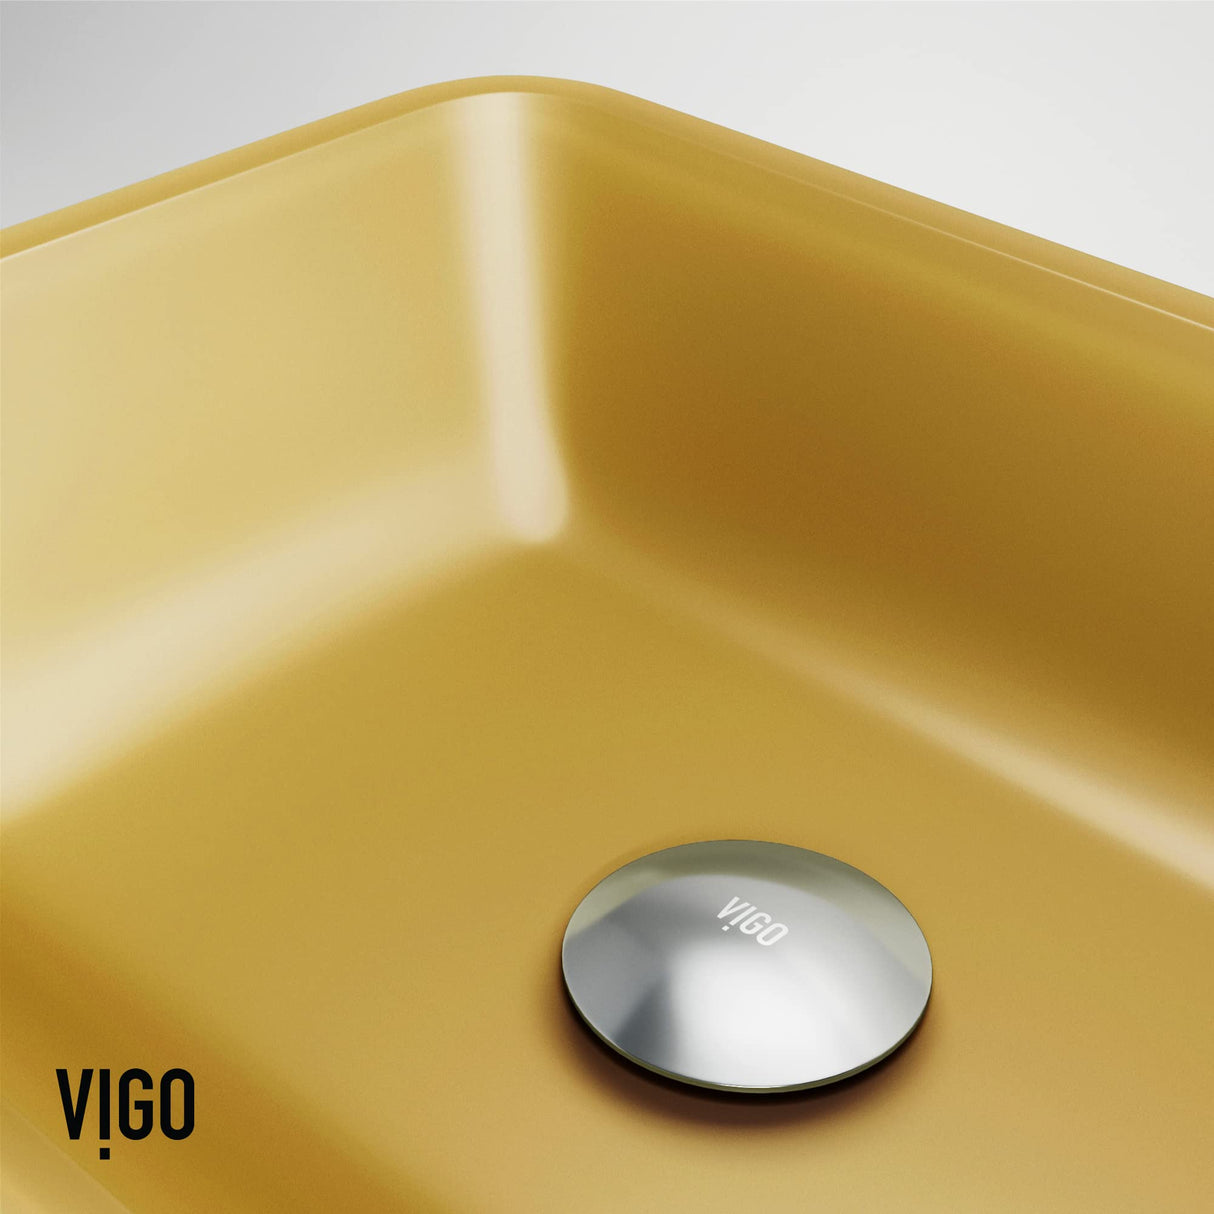 VIGO VGT2069 13.0" L -18.13" W -4.13" H Matte Shell Sottile Glass Rectangular Vessel Bathroom Sink in Gold with Norfolk Faucet and Pop-up Drain in Matte Gold